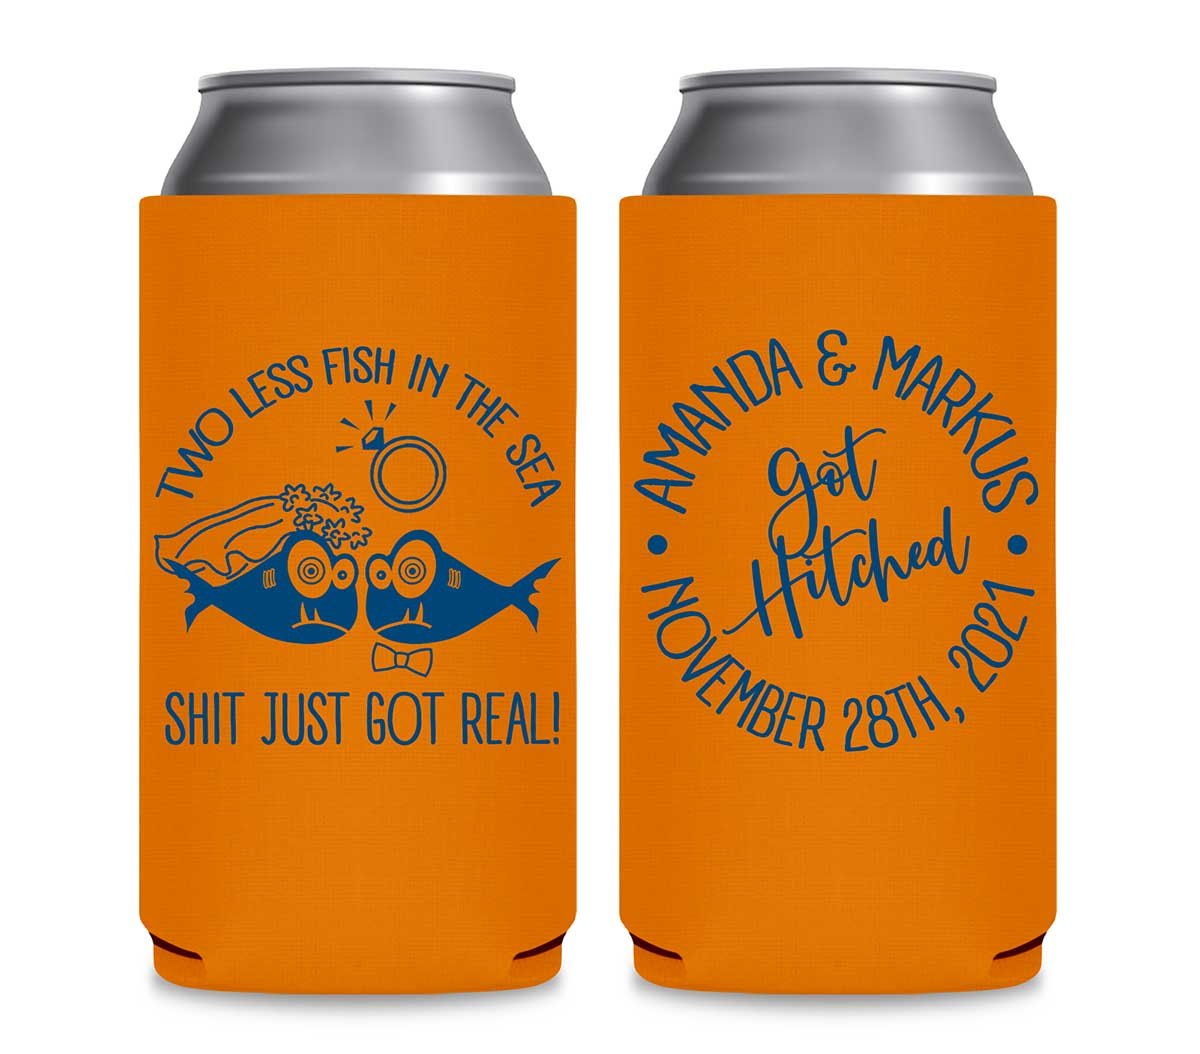 Two Less Fish In The Fish 3A Shit Just Got Real Foldable 12 oz Slim Can Koozies Wedding Gifts for Guests